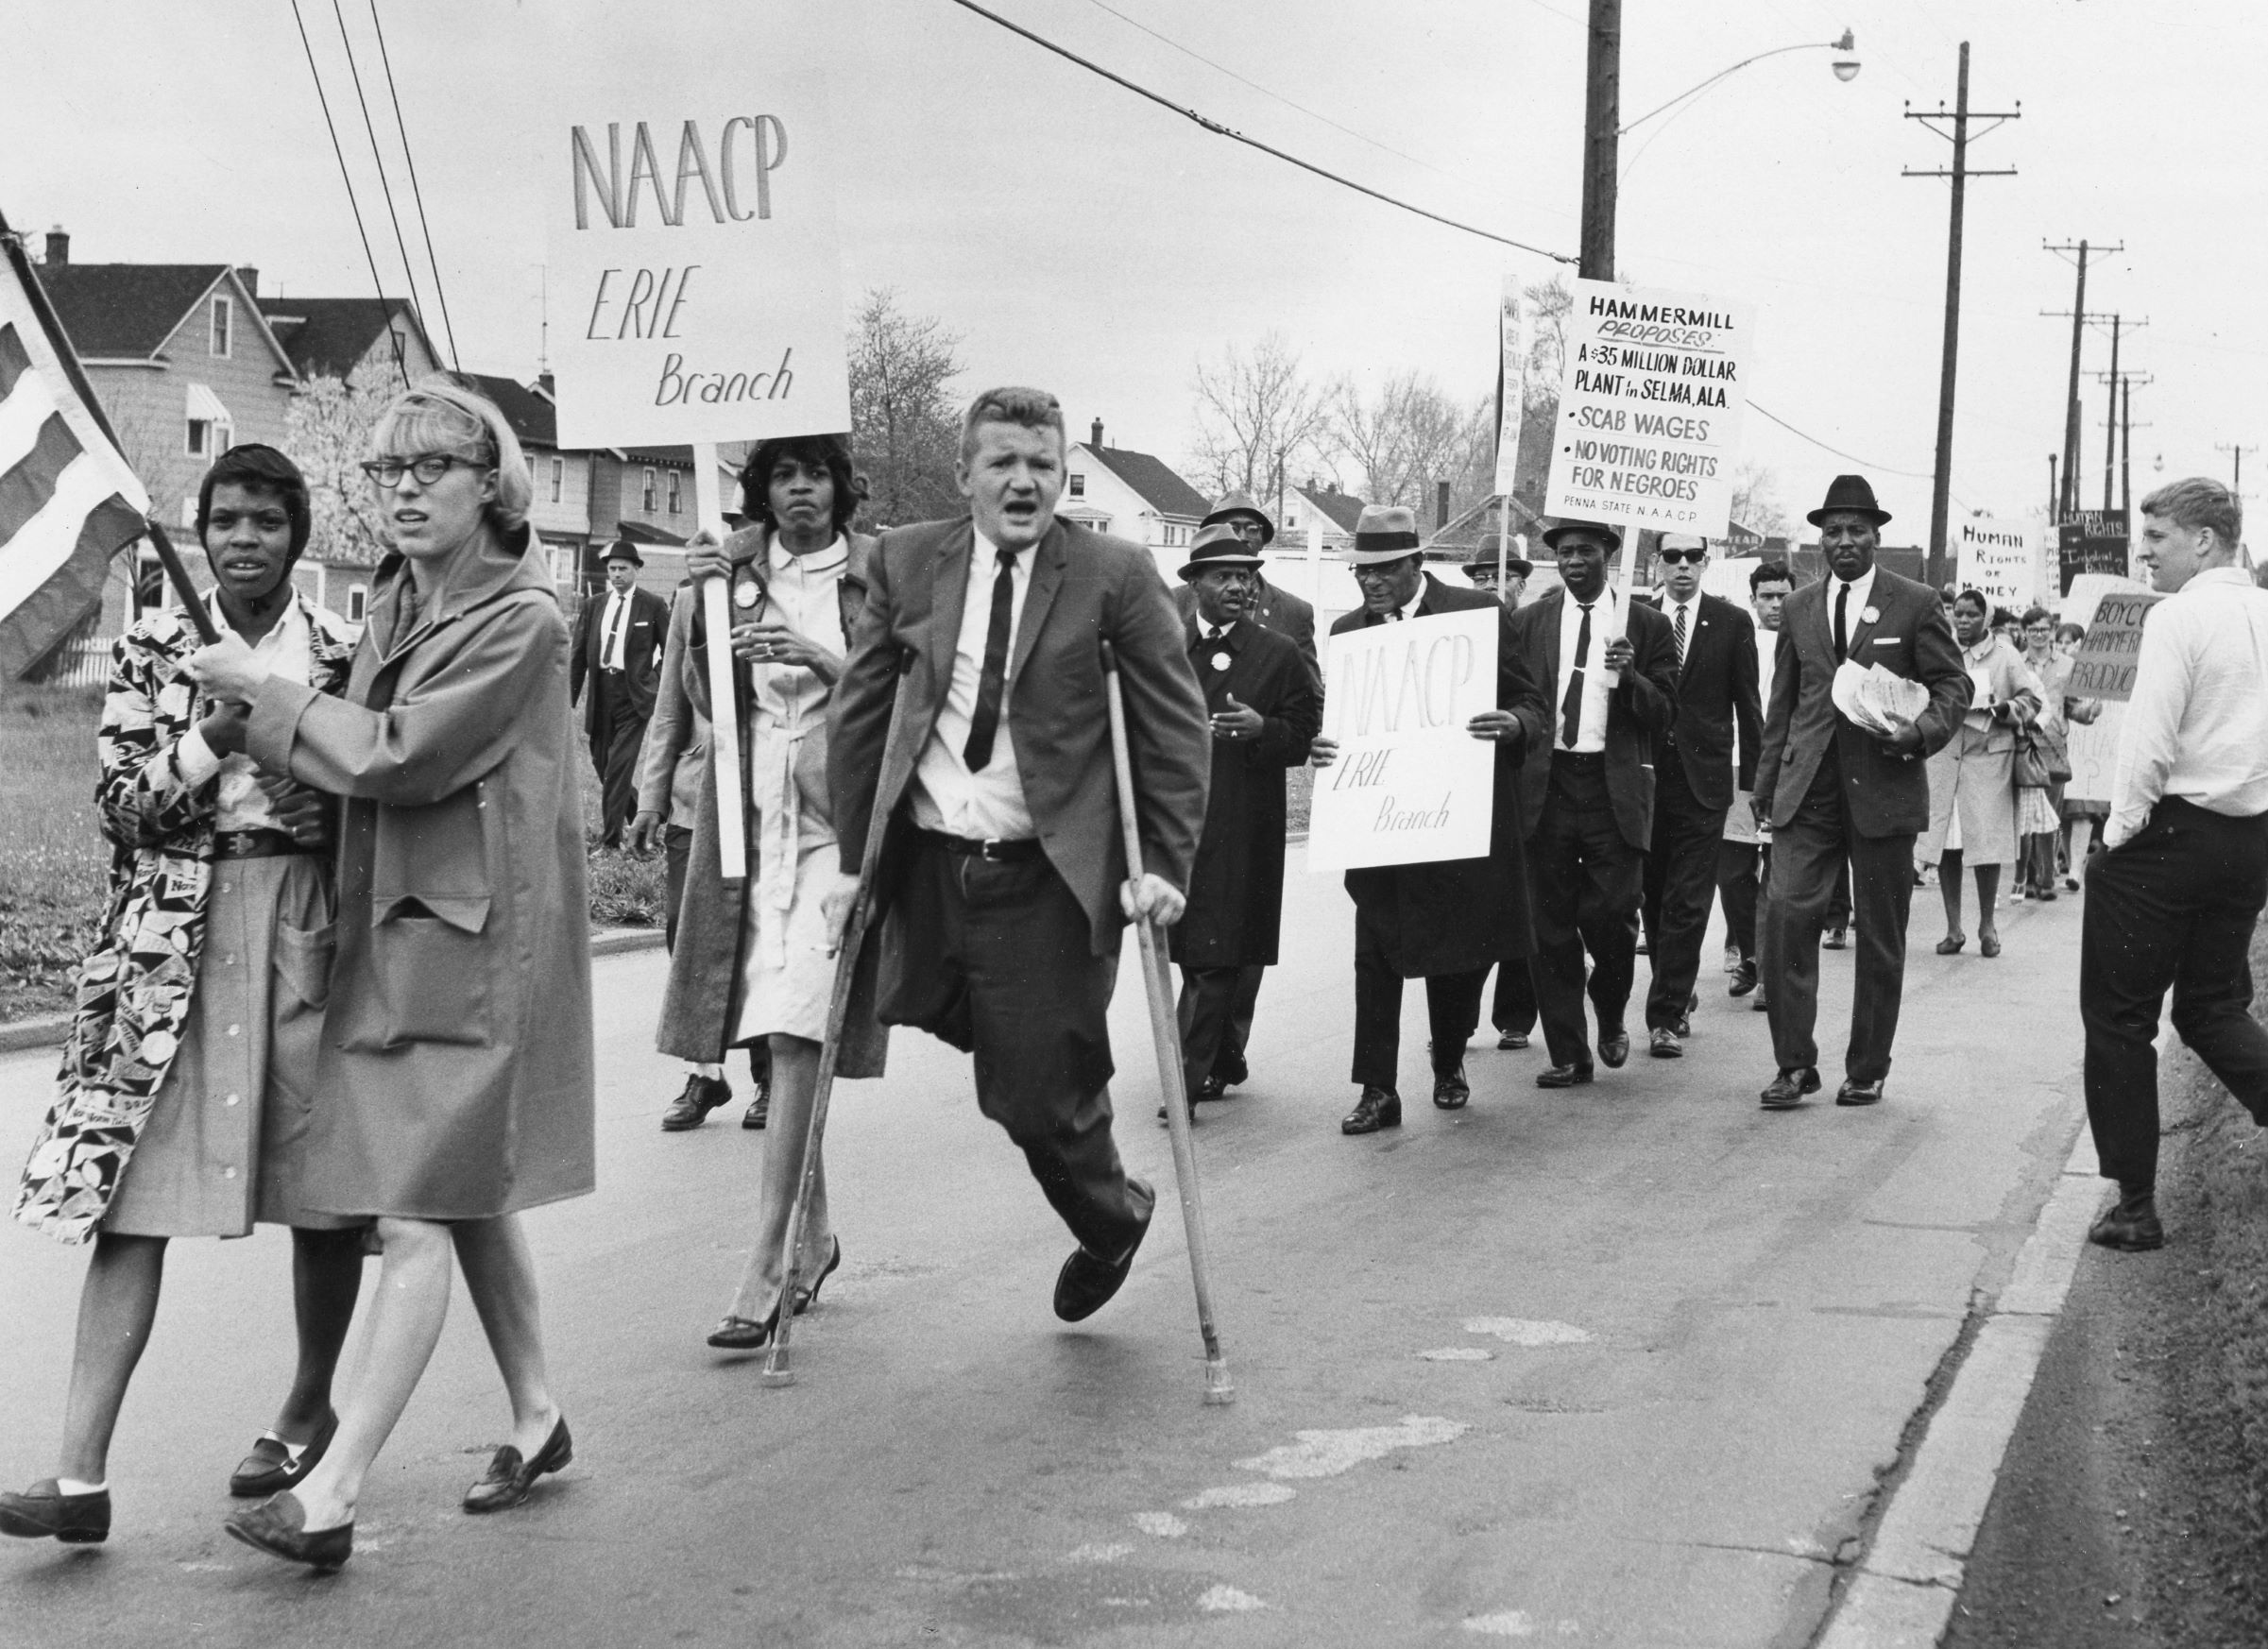 gr 01 29 20 NAACP strike picket lines 1960s 072